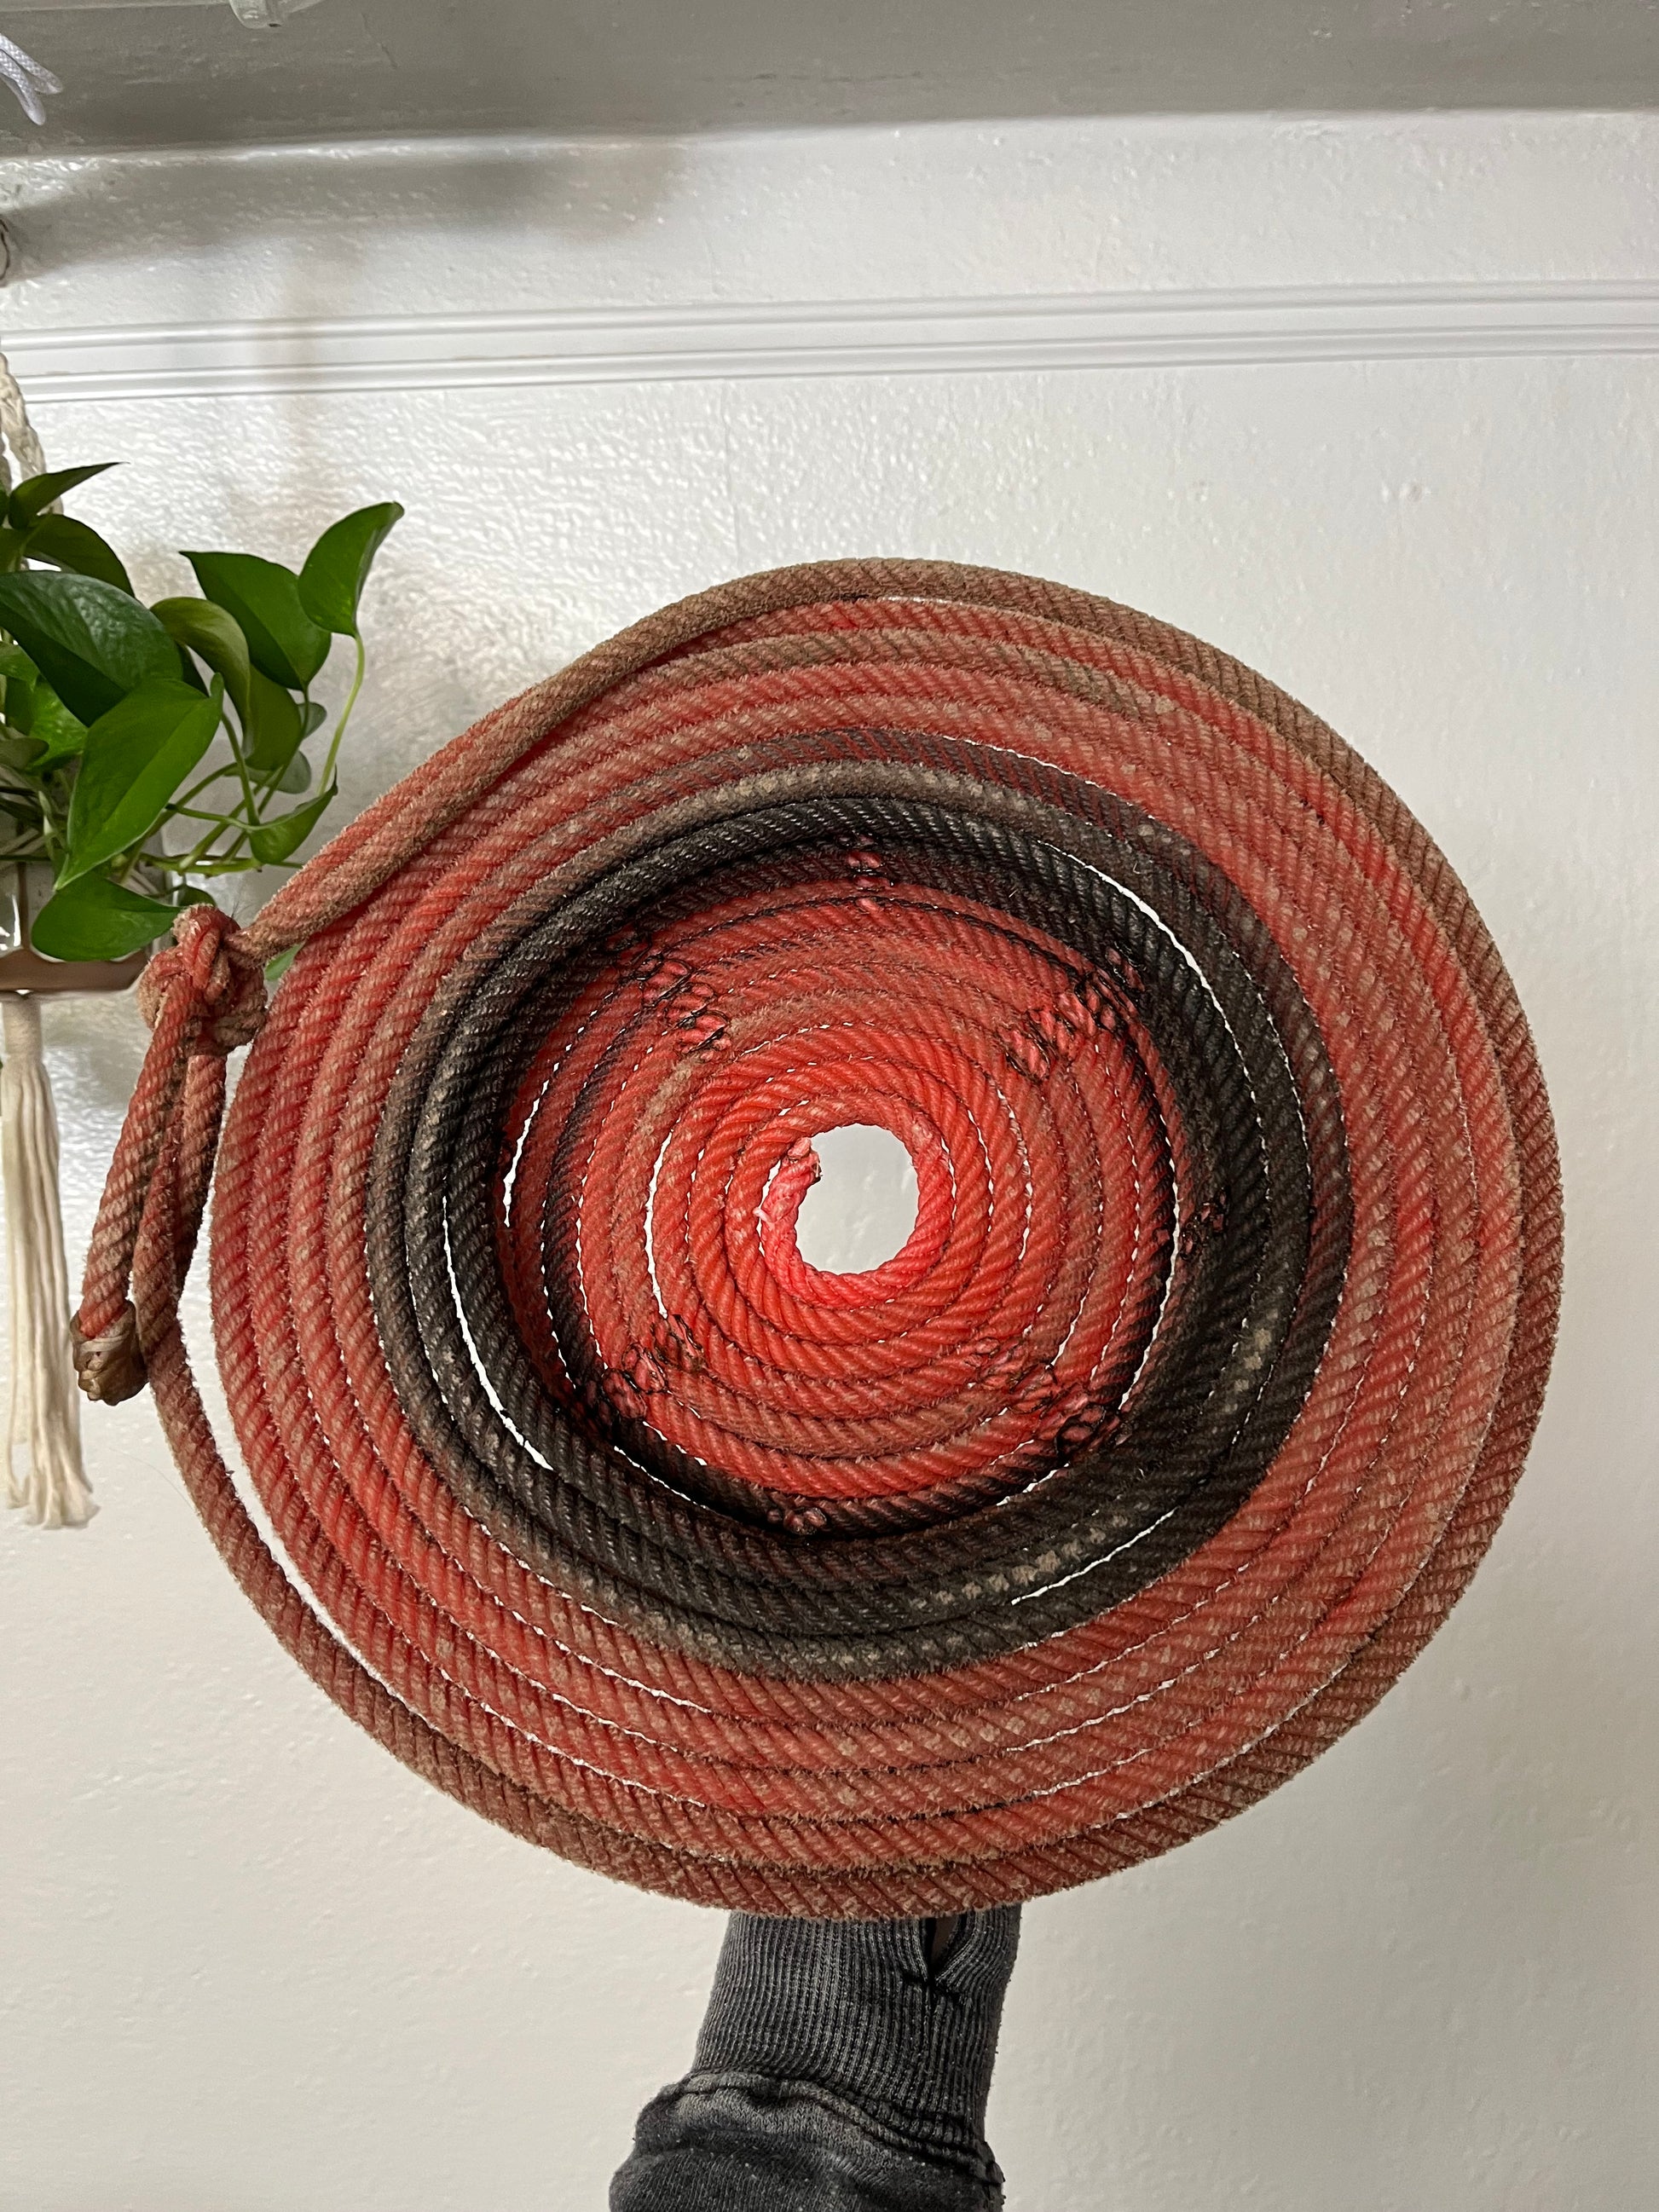 Red Brimmed Rope Basket Artist: Aleah Russell  Repurposed lariat rope  Rope came from an authentic Wyoming ranch  Shallow rope basket with wide brim  Will add a touch of country to any home  Would make a nice fruit basket  Add a bowl inside for holding small items  14.5" long x 13.5" high x 3" wide